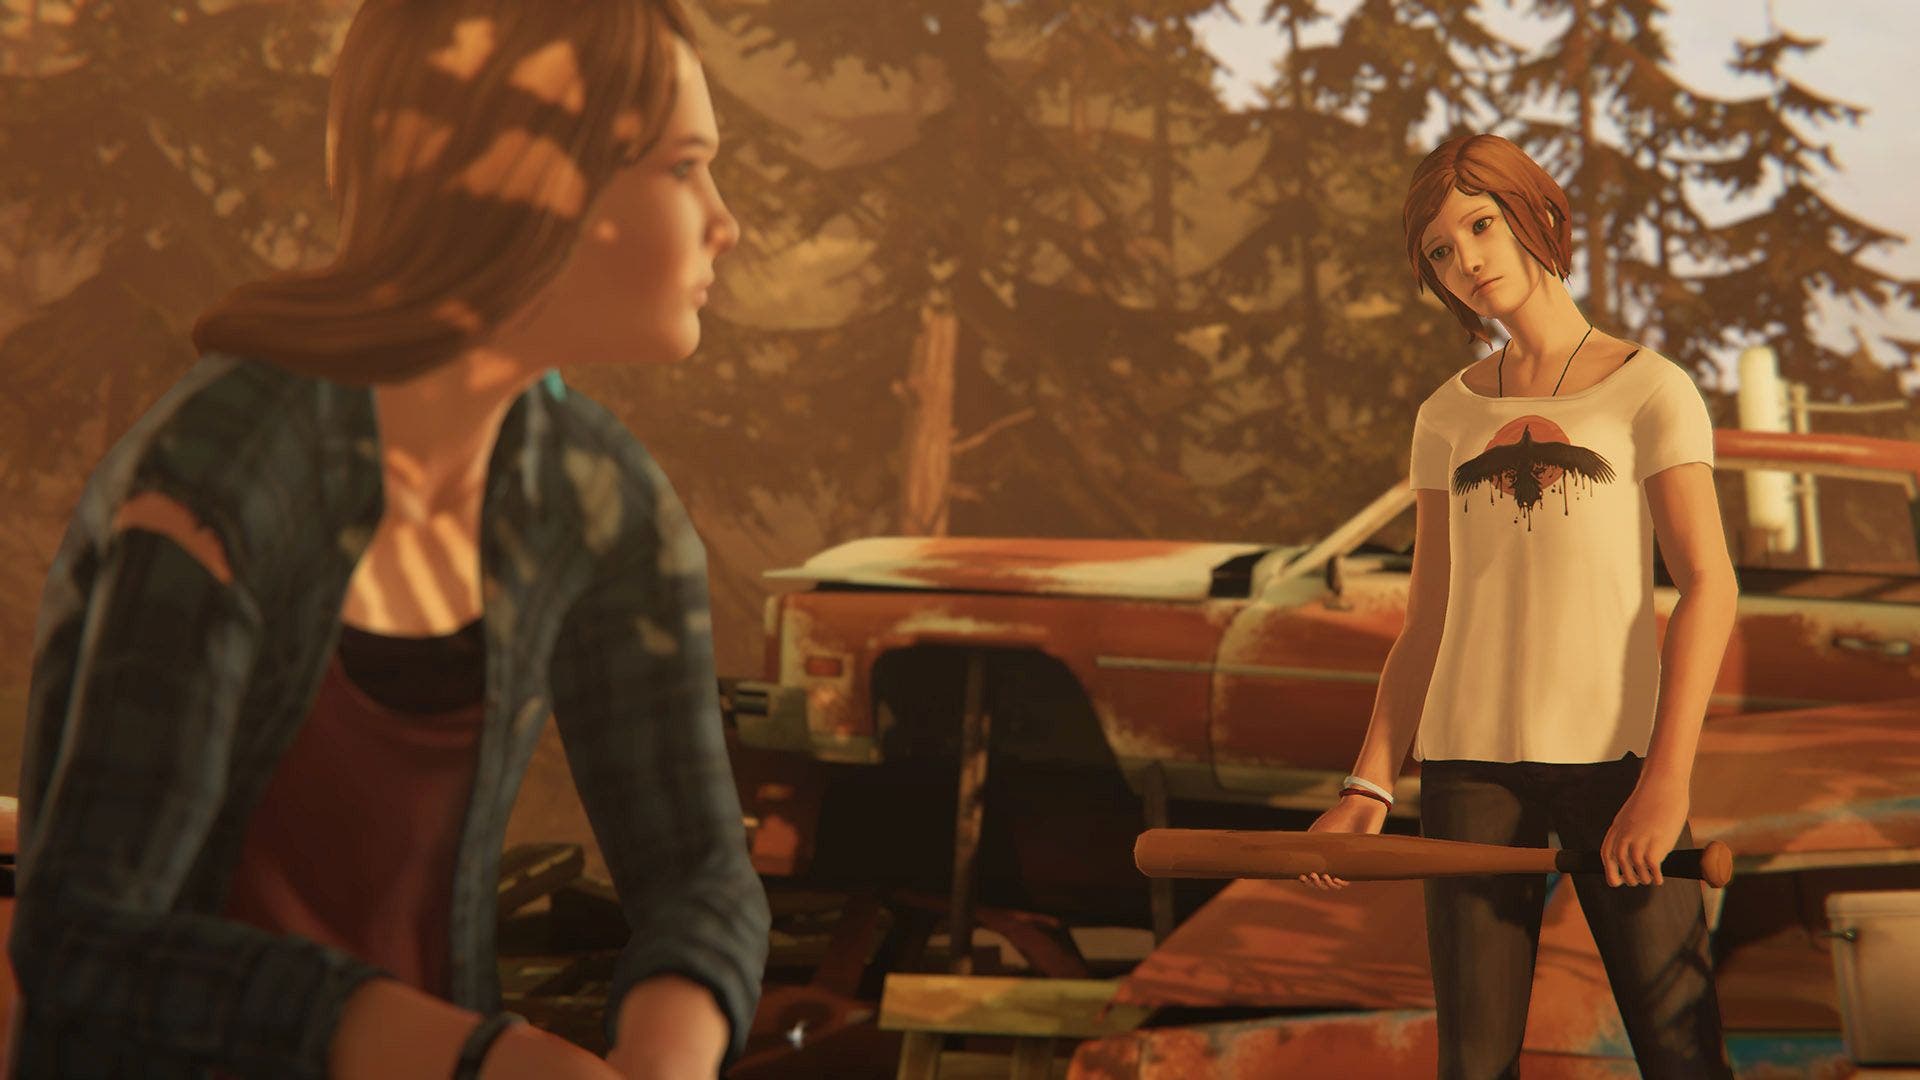 LiS Before the Storm 3